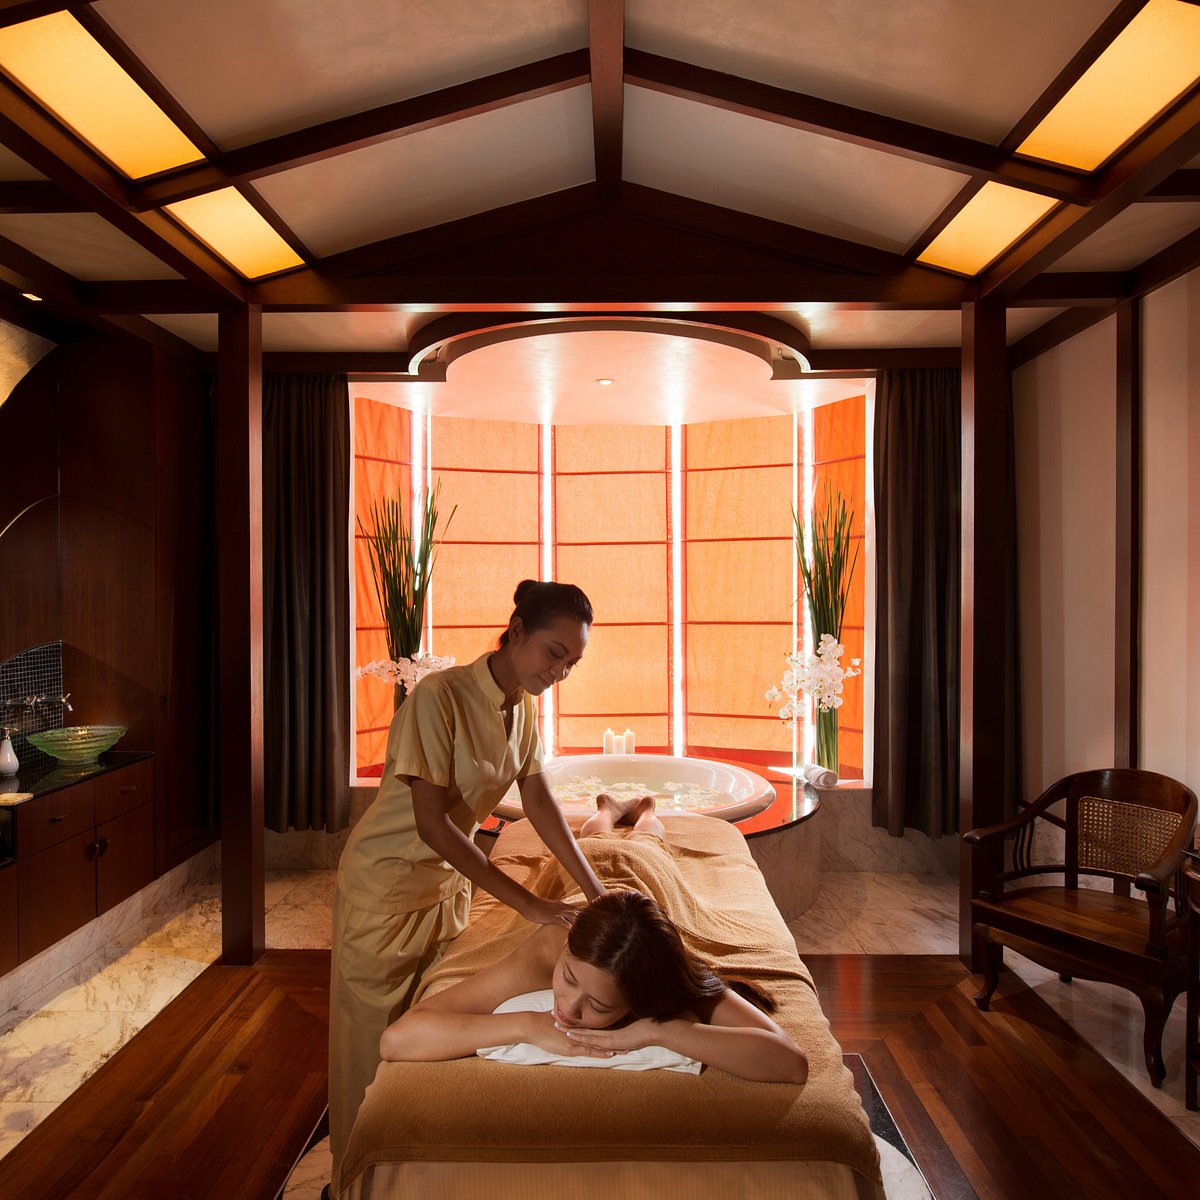 The Spa And Wellness At Hilton Kuala Lumpur All You Need To Know Before You Go